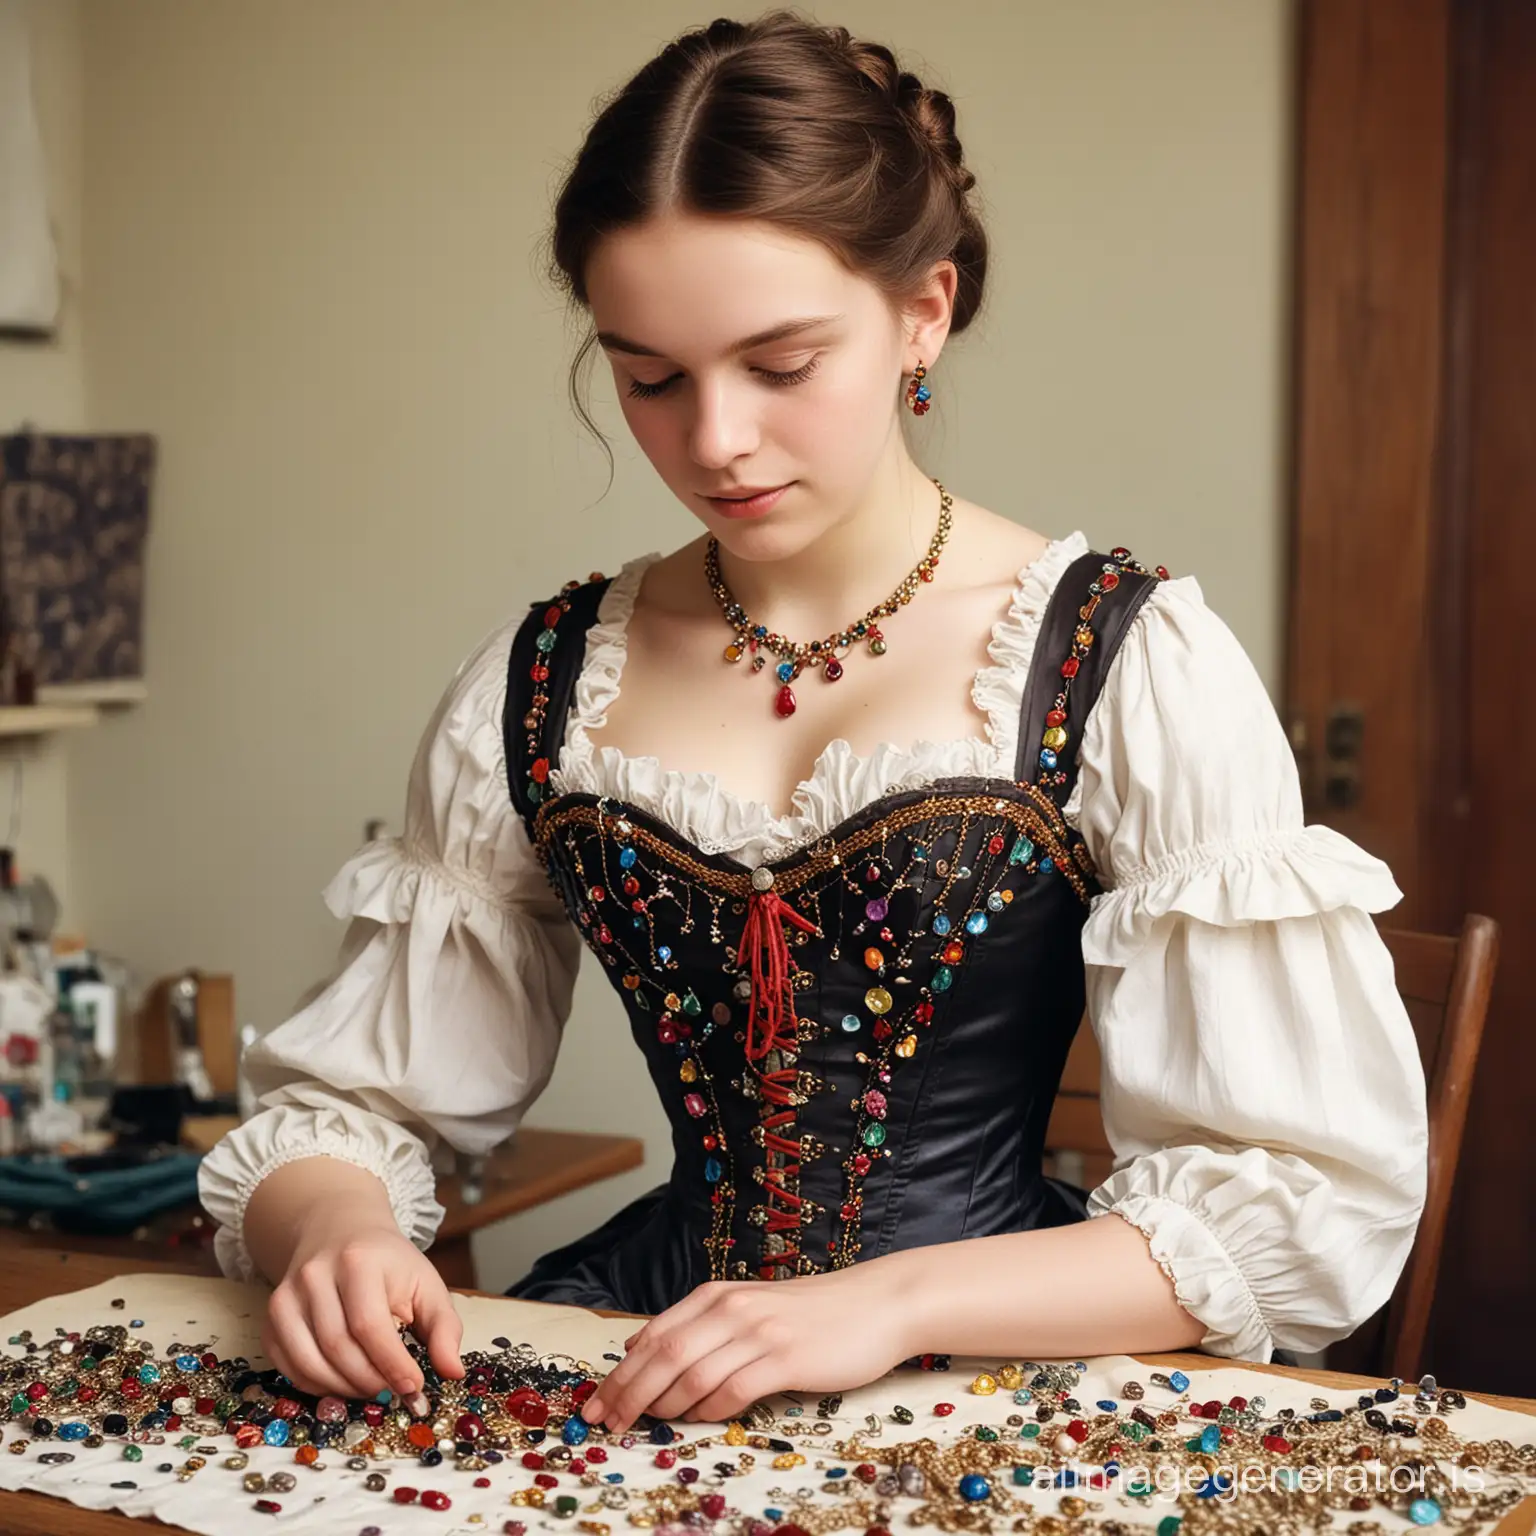 sixteen year old wearing dress.at a desk ina work shop  sewing clunky colourful jewels and rubies into the a corset. 19th century europe.